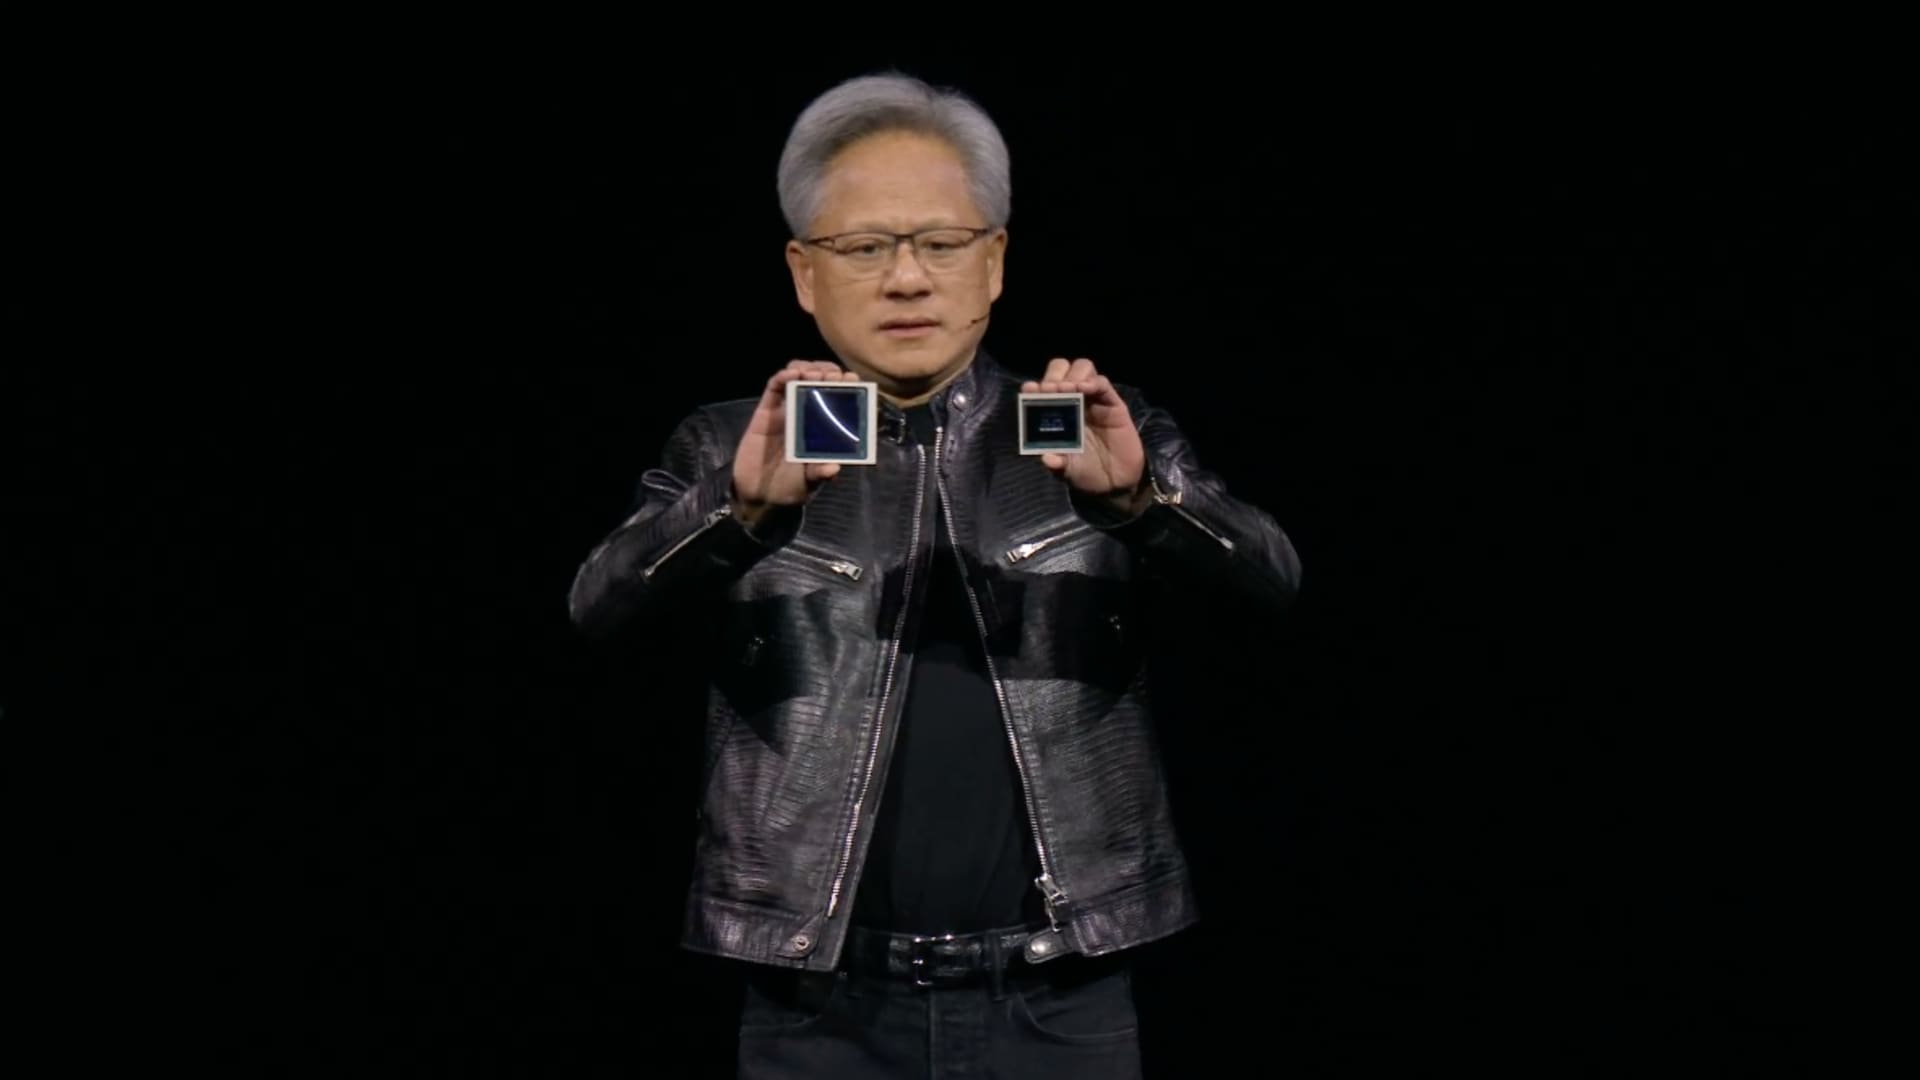 Nvidia's latest AI chip will cost more than ,000, CEO says